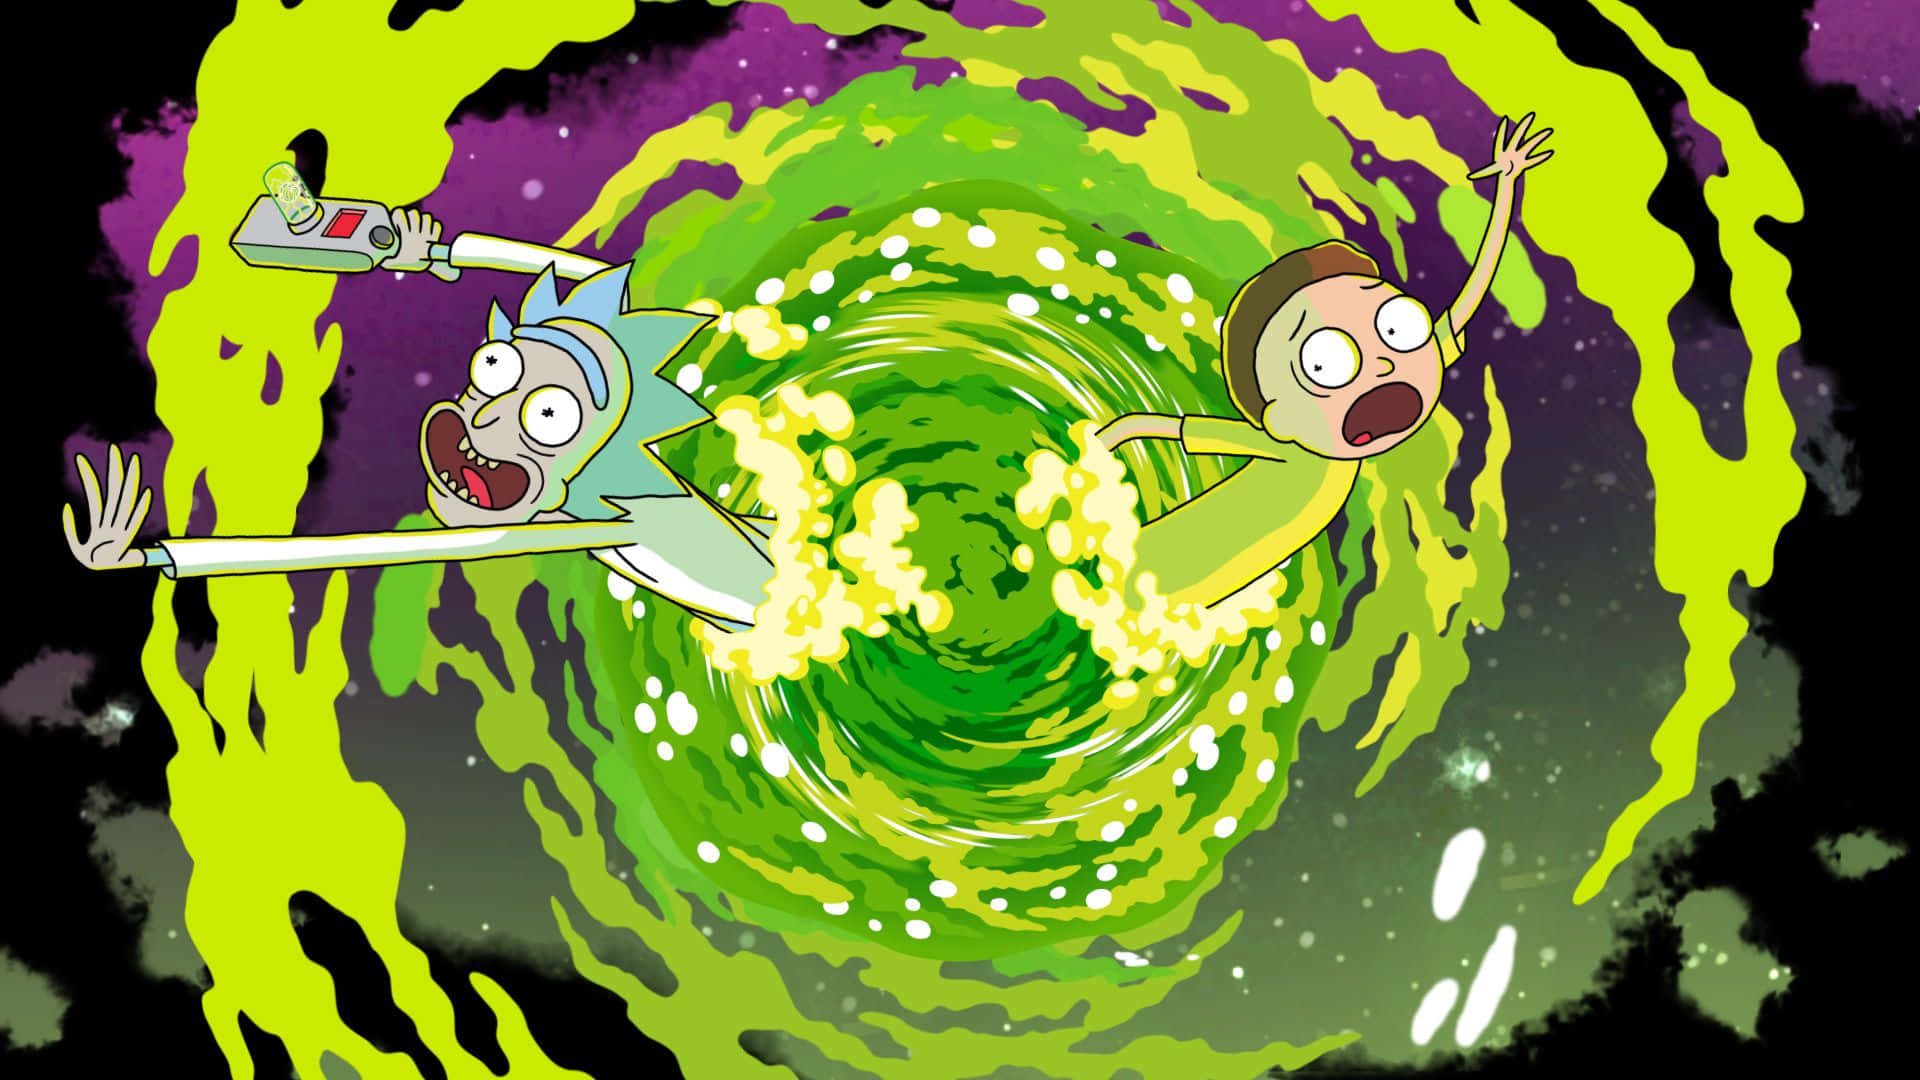 Work on the go with your favorite Rick and Morty laptop Wallpaper